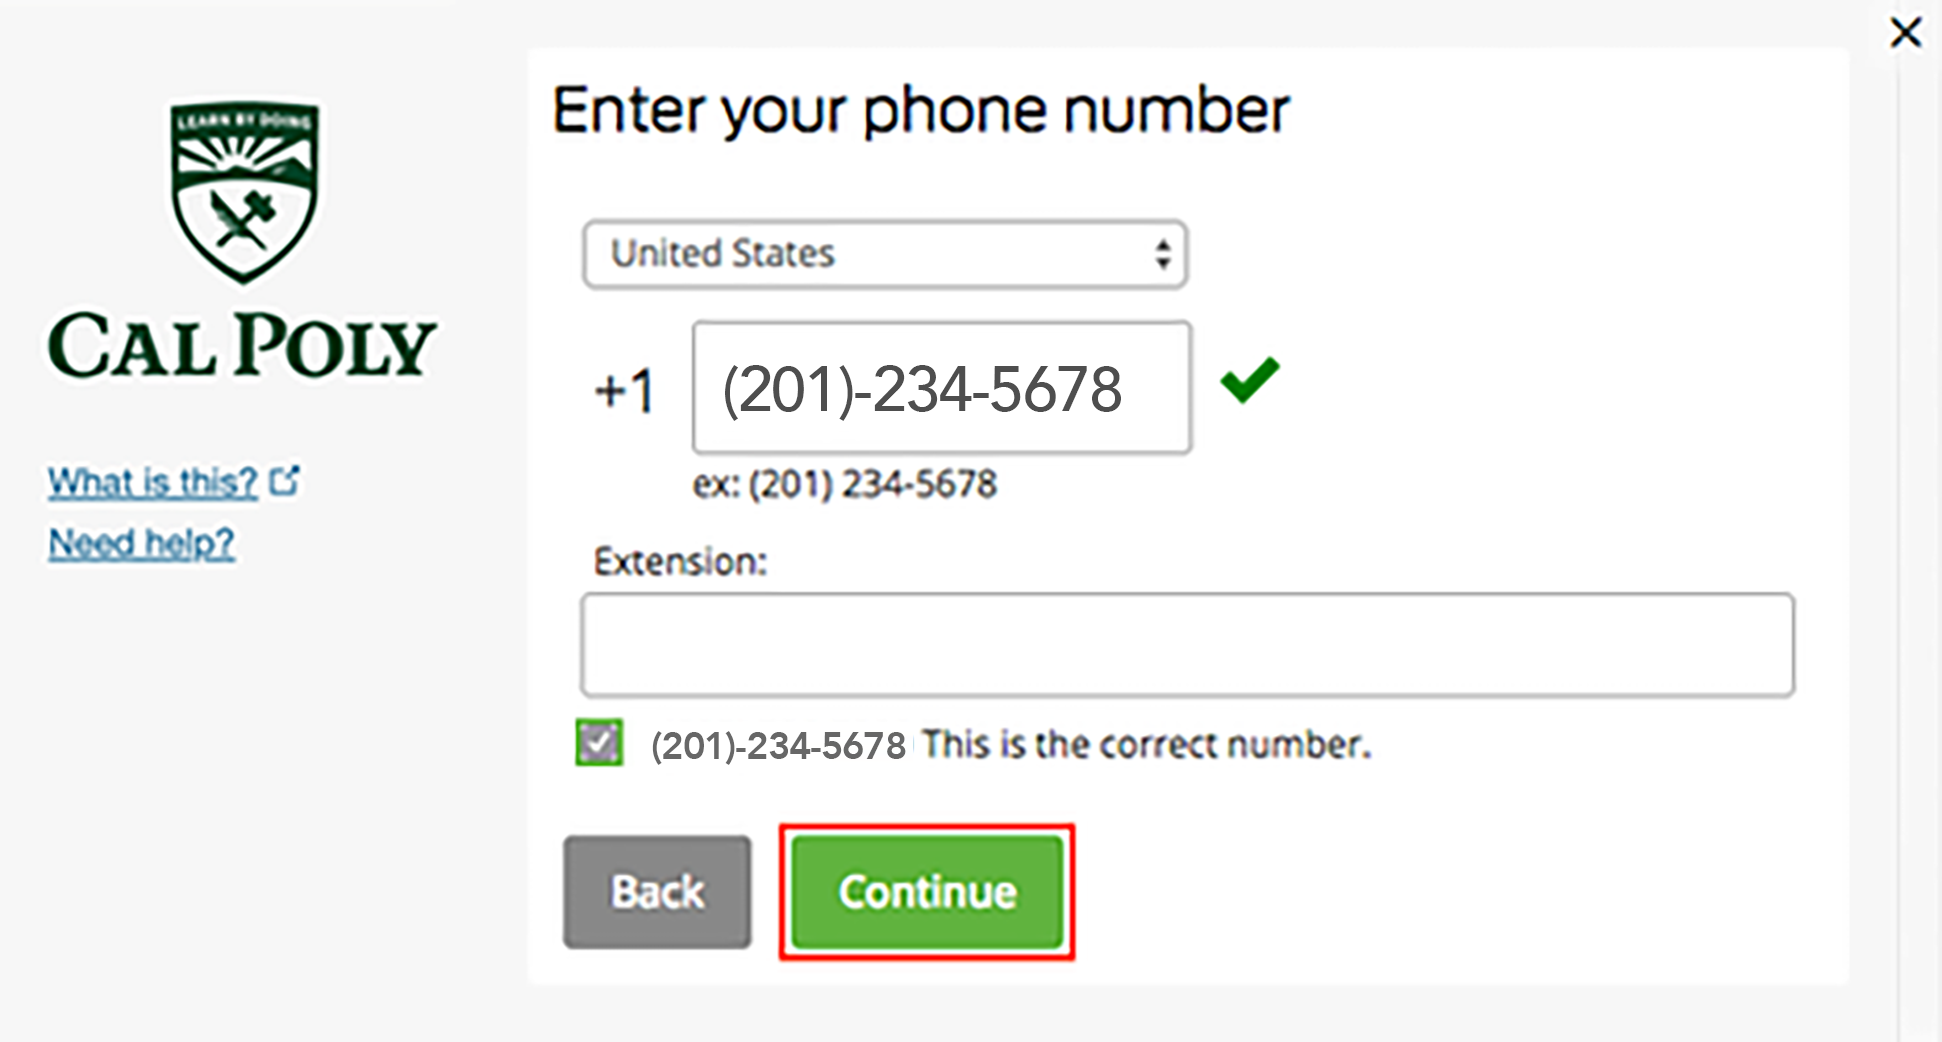 Enter your phone number dialog box shown with phone number (201)-234-5678 entered checkbox selected and Continue button highlighted.